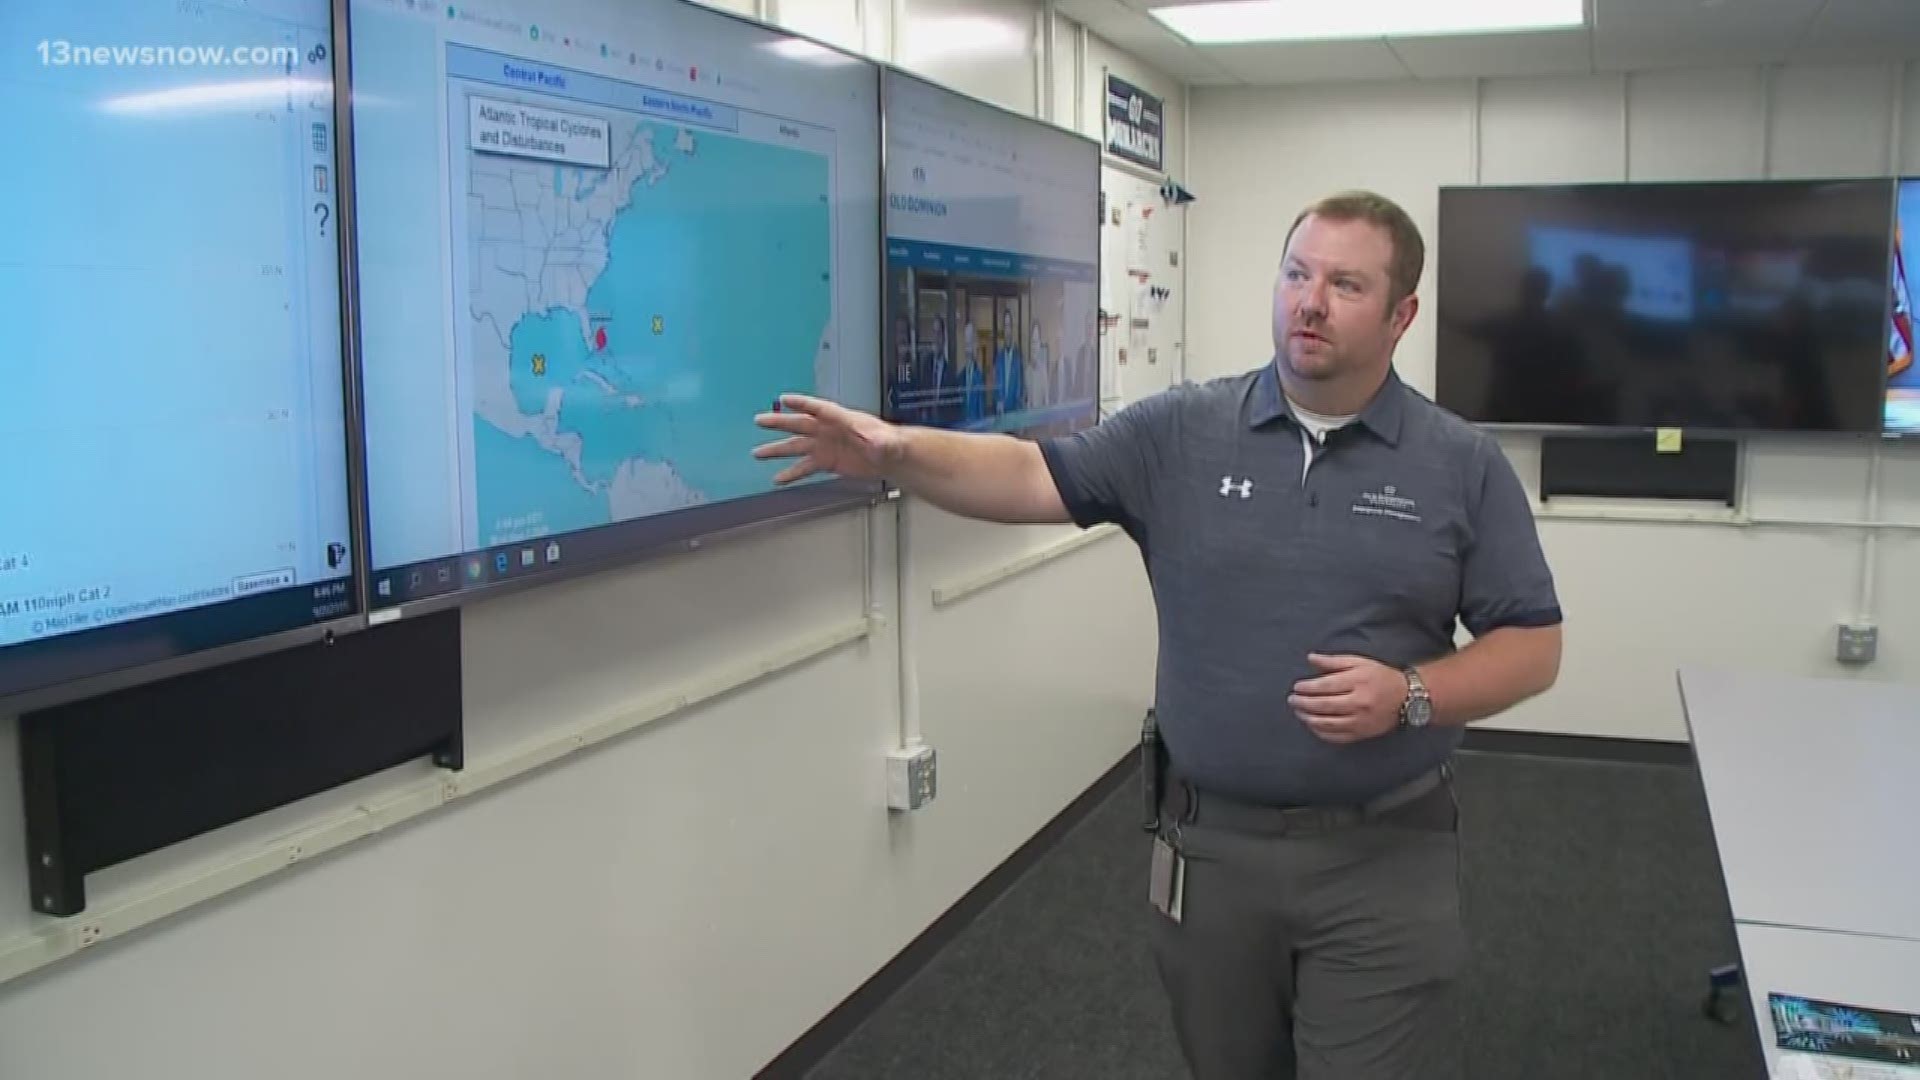 ODU's Office of Emergency Management treats the campus as its own city. In their office, they monitor Hurricane Dorian's projected track and potential areas that'll see impacts.